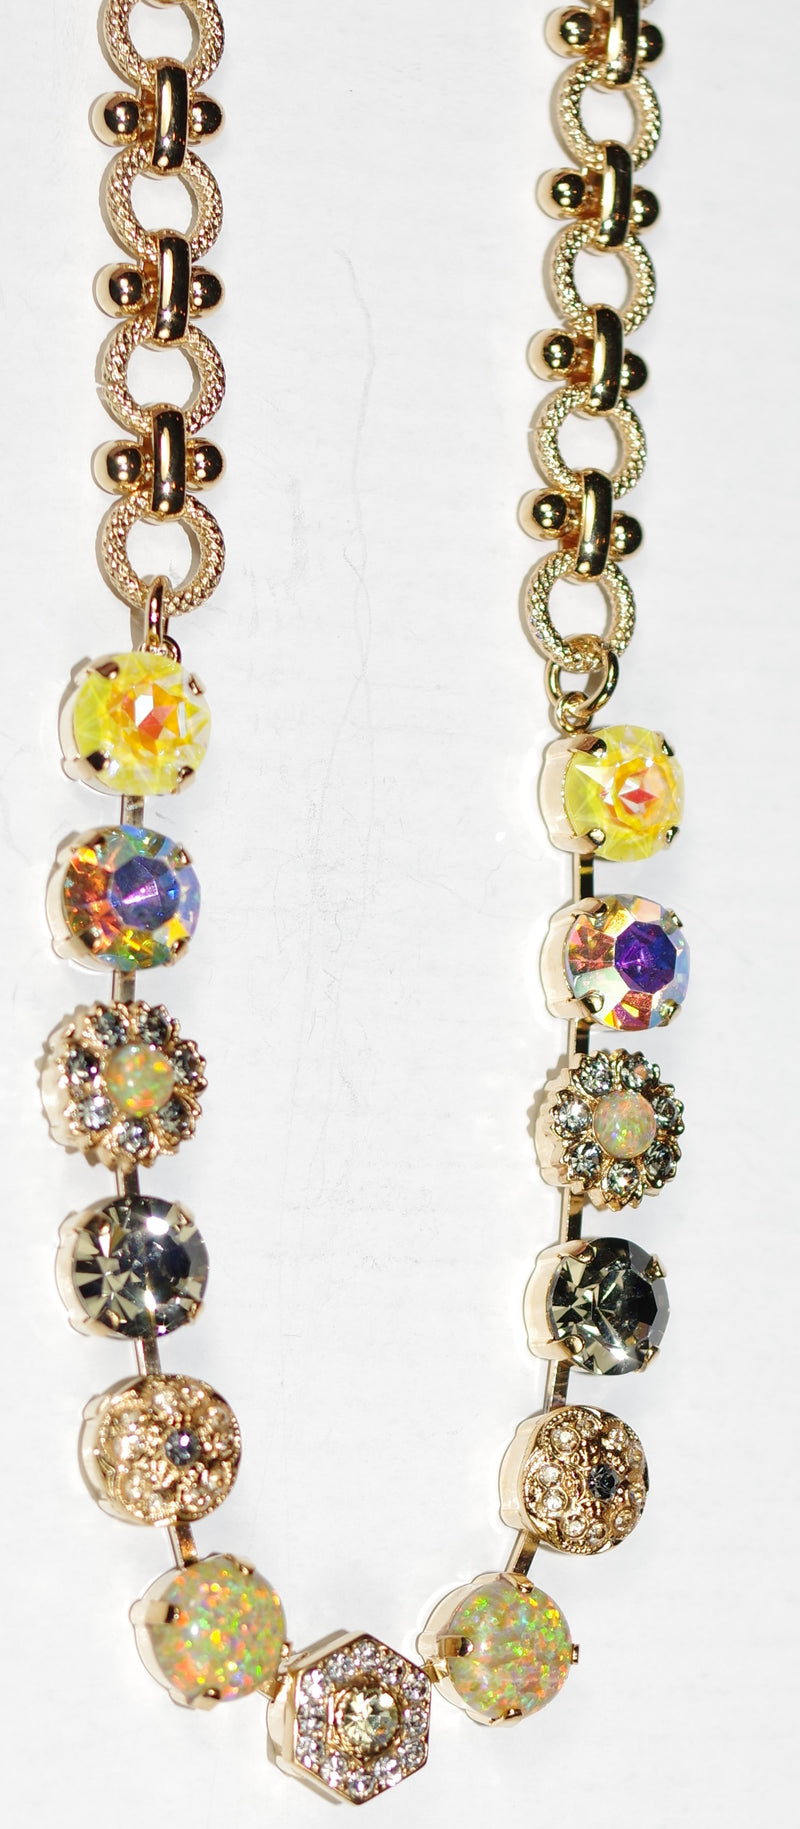 MARIANA NECKLACE PAINTED LADY: yellow, taupe, a/b, simulated opal 3/8" stones in yellow gold setting, 18" adjustable chain